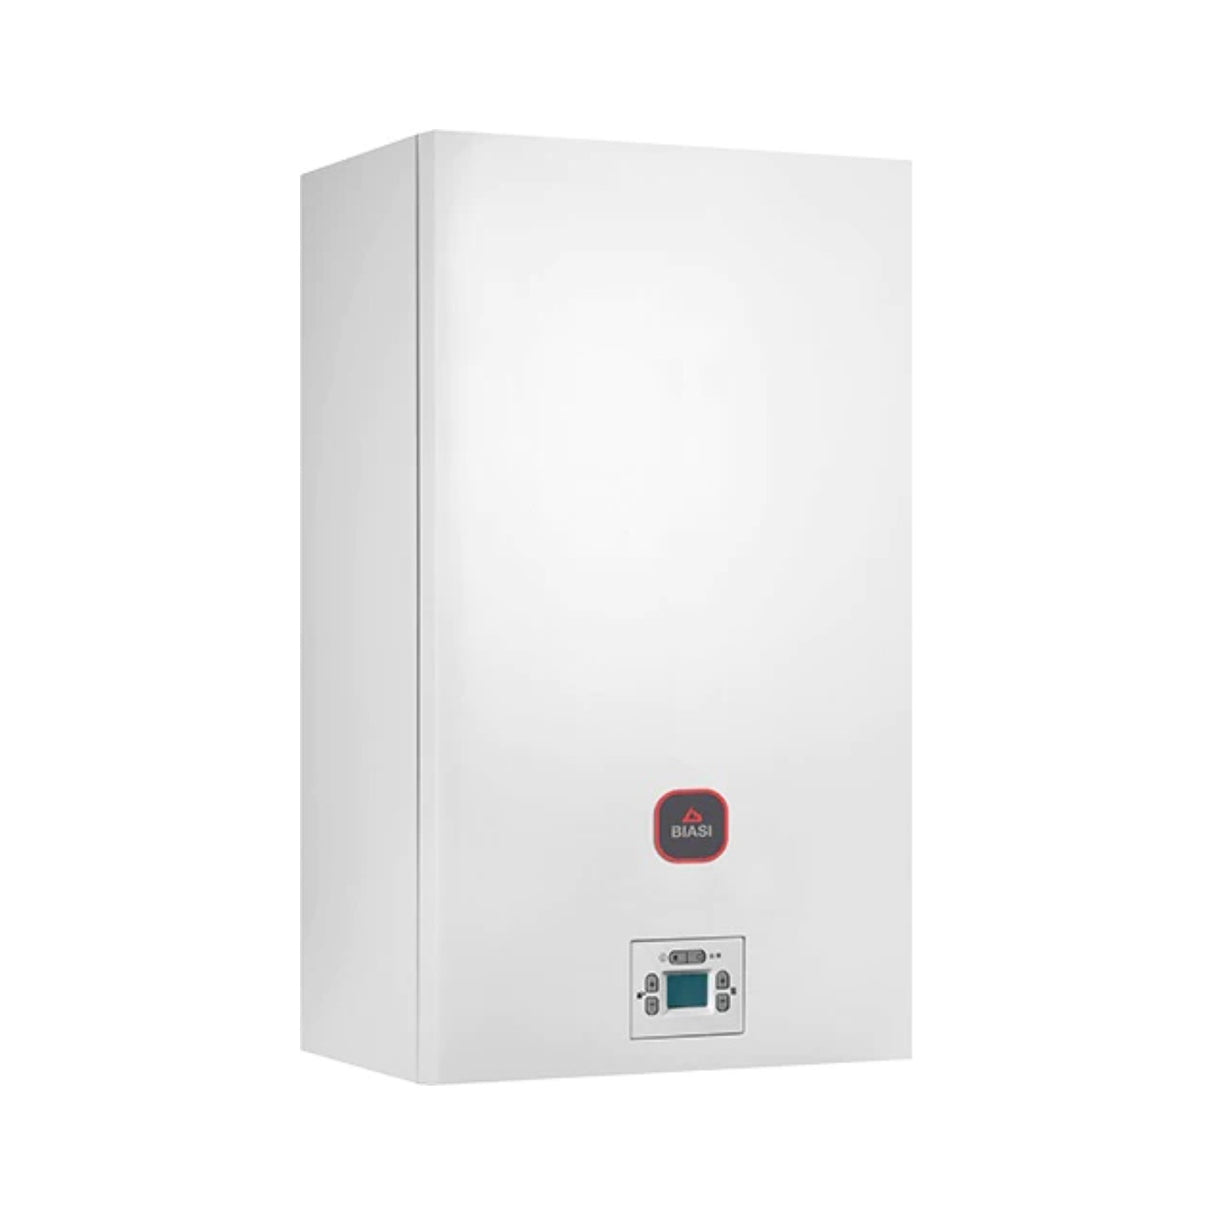 Biasi RinNOVA COND 24S condensing boiler Low NOx class A Complete with methane fume exhaust kit